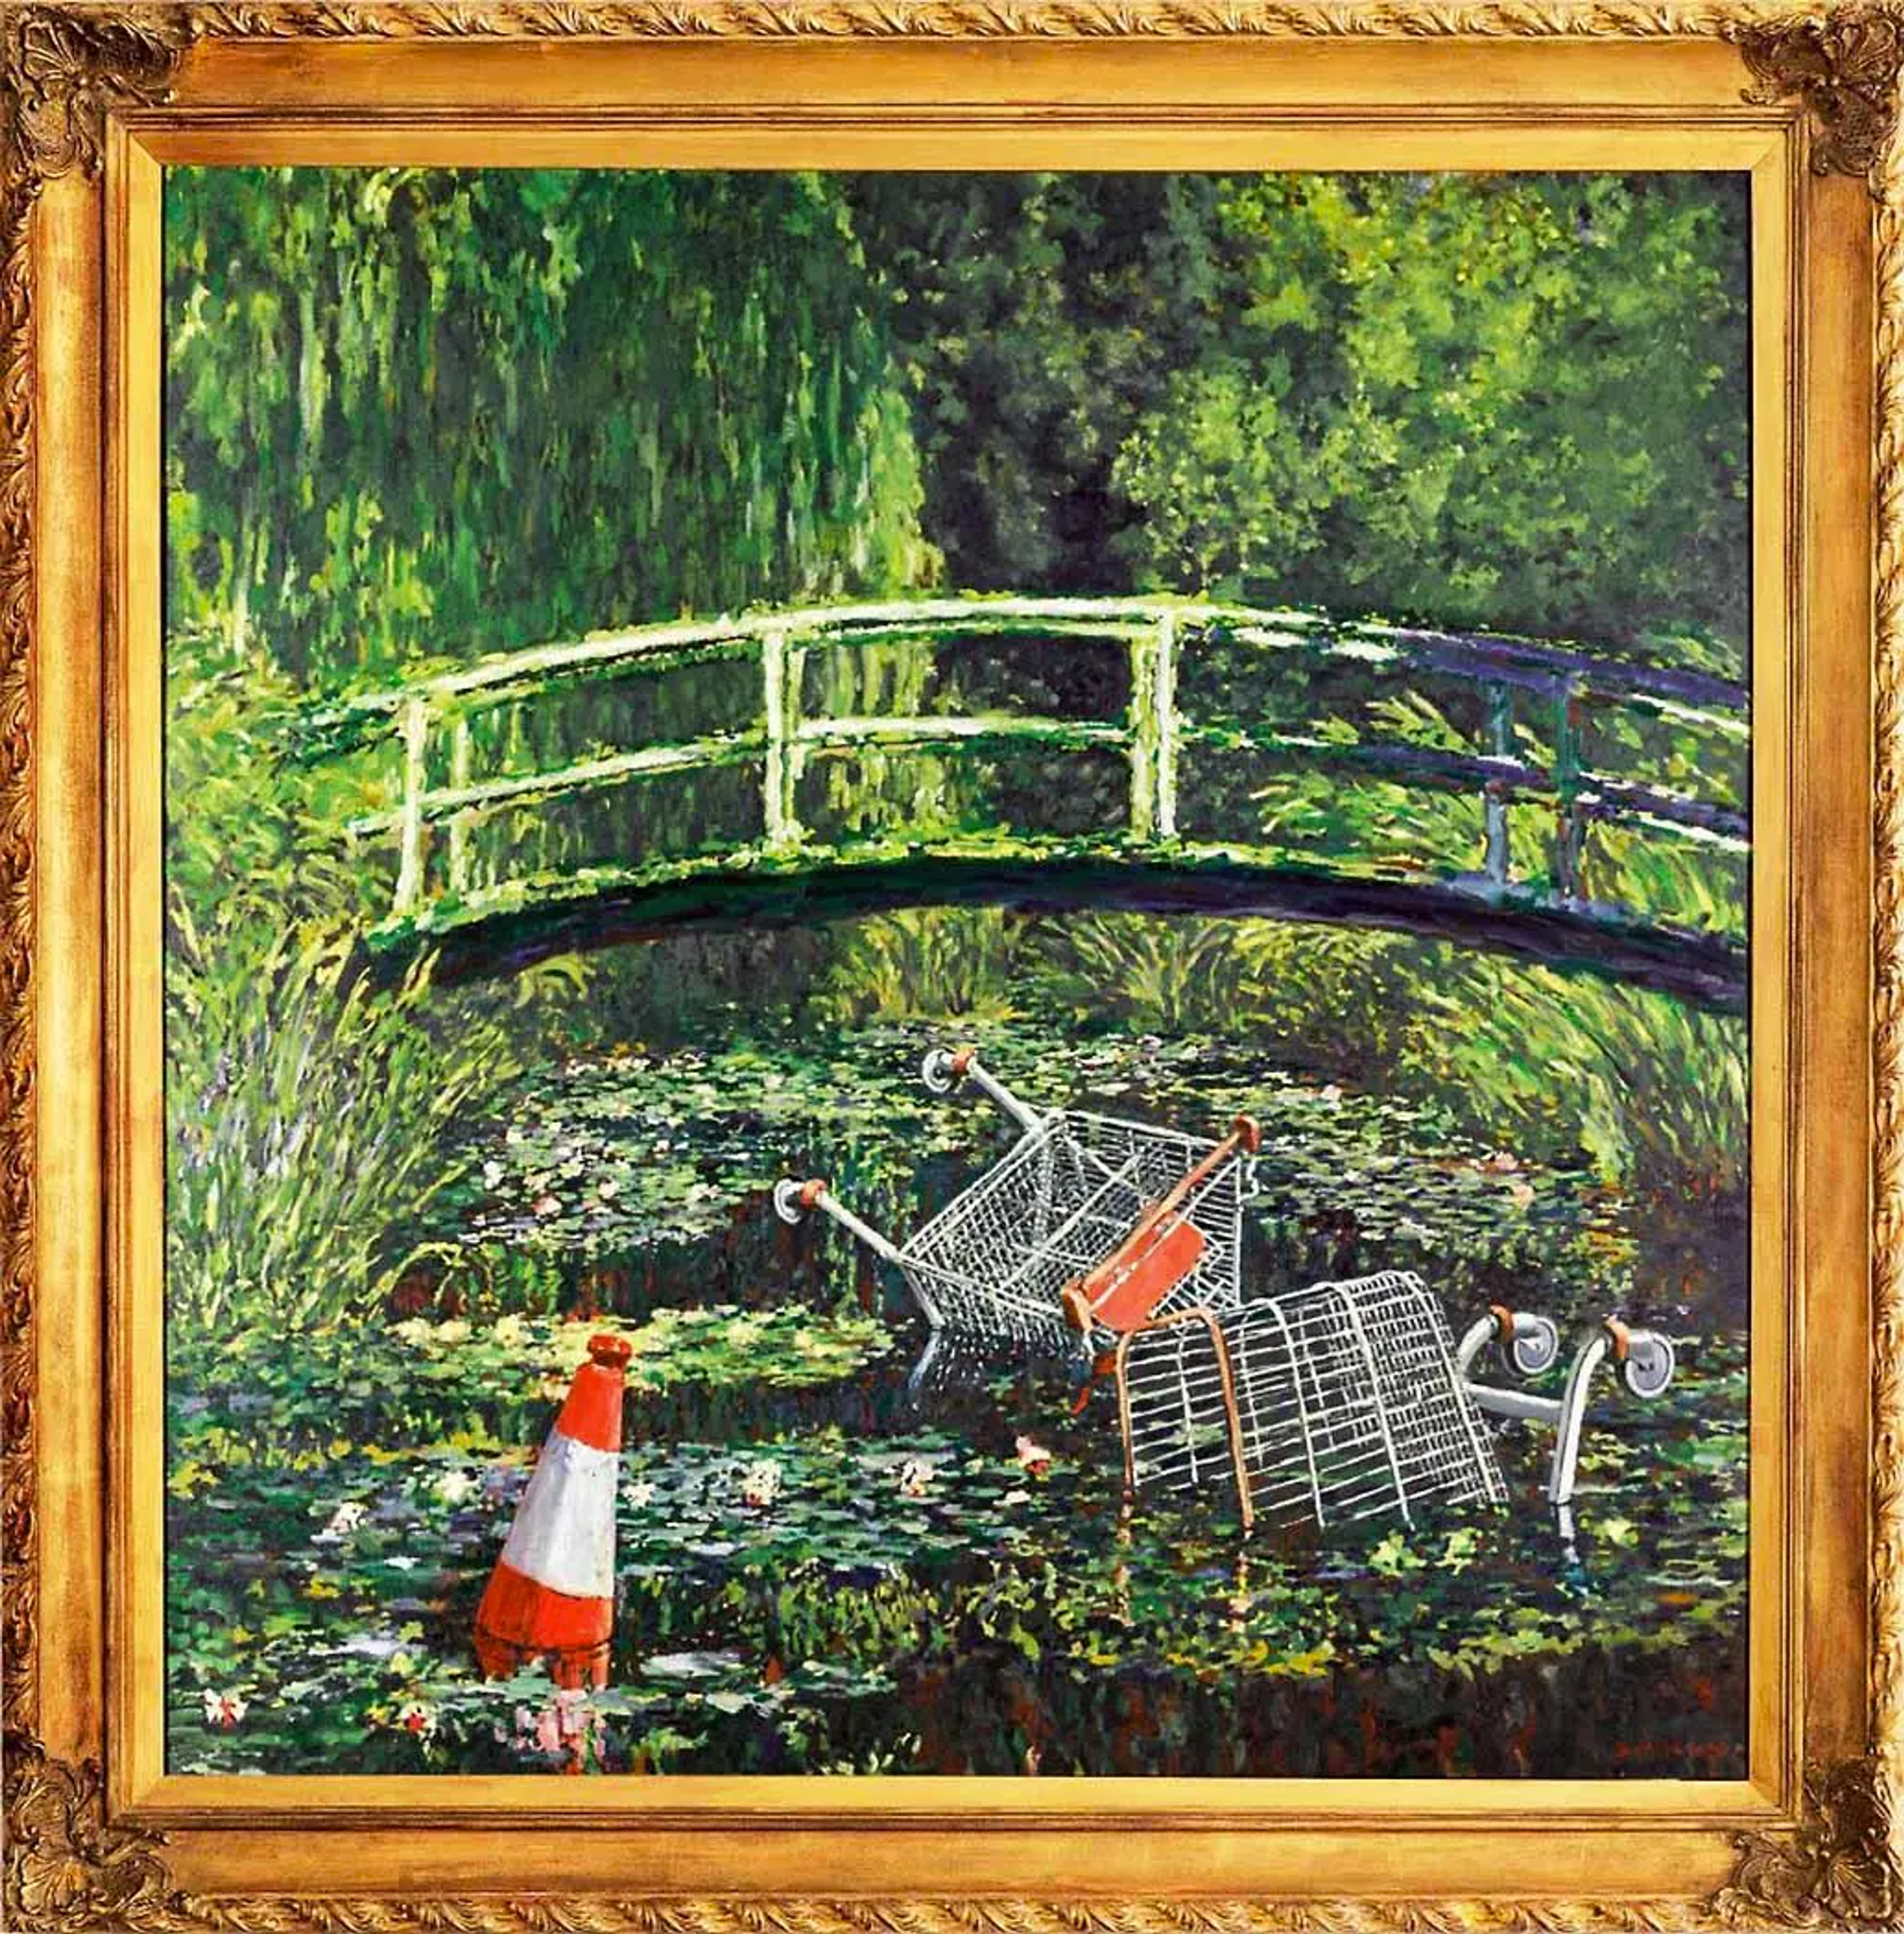 This work by Banksy shows Monet's iconic Japanese Bridge at Giverny, interrupted by two shopping trolleys and traffic cone tossed in the pond.